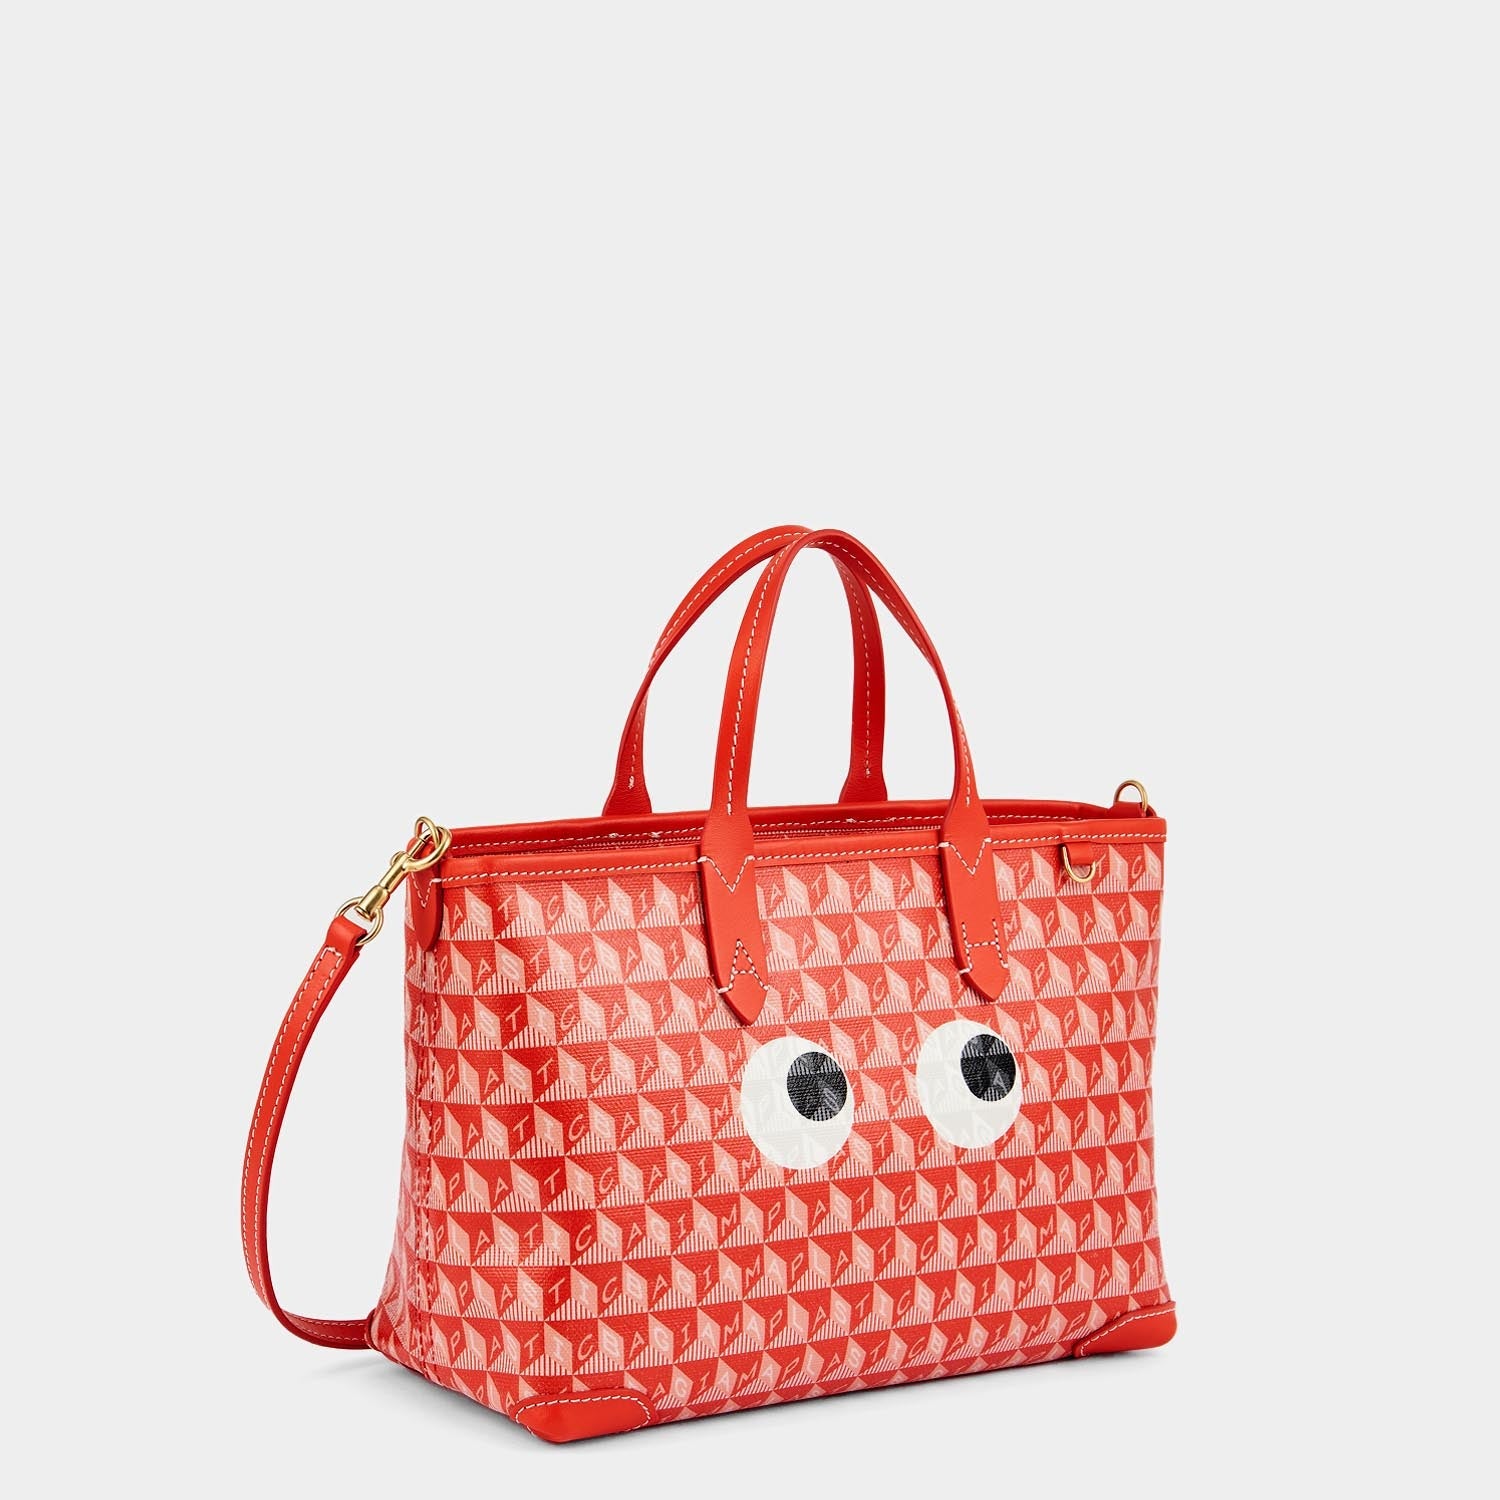 Women's I Am A Plastic Bag Eyes Tote Bag by Anya Hindmarch